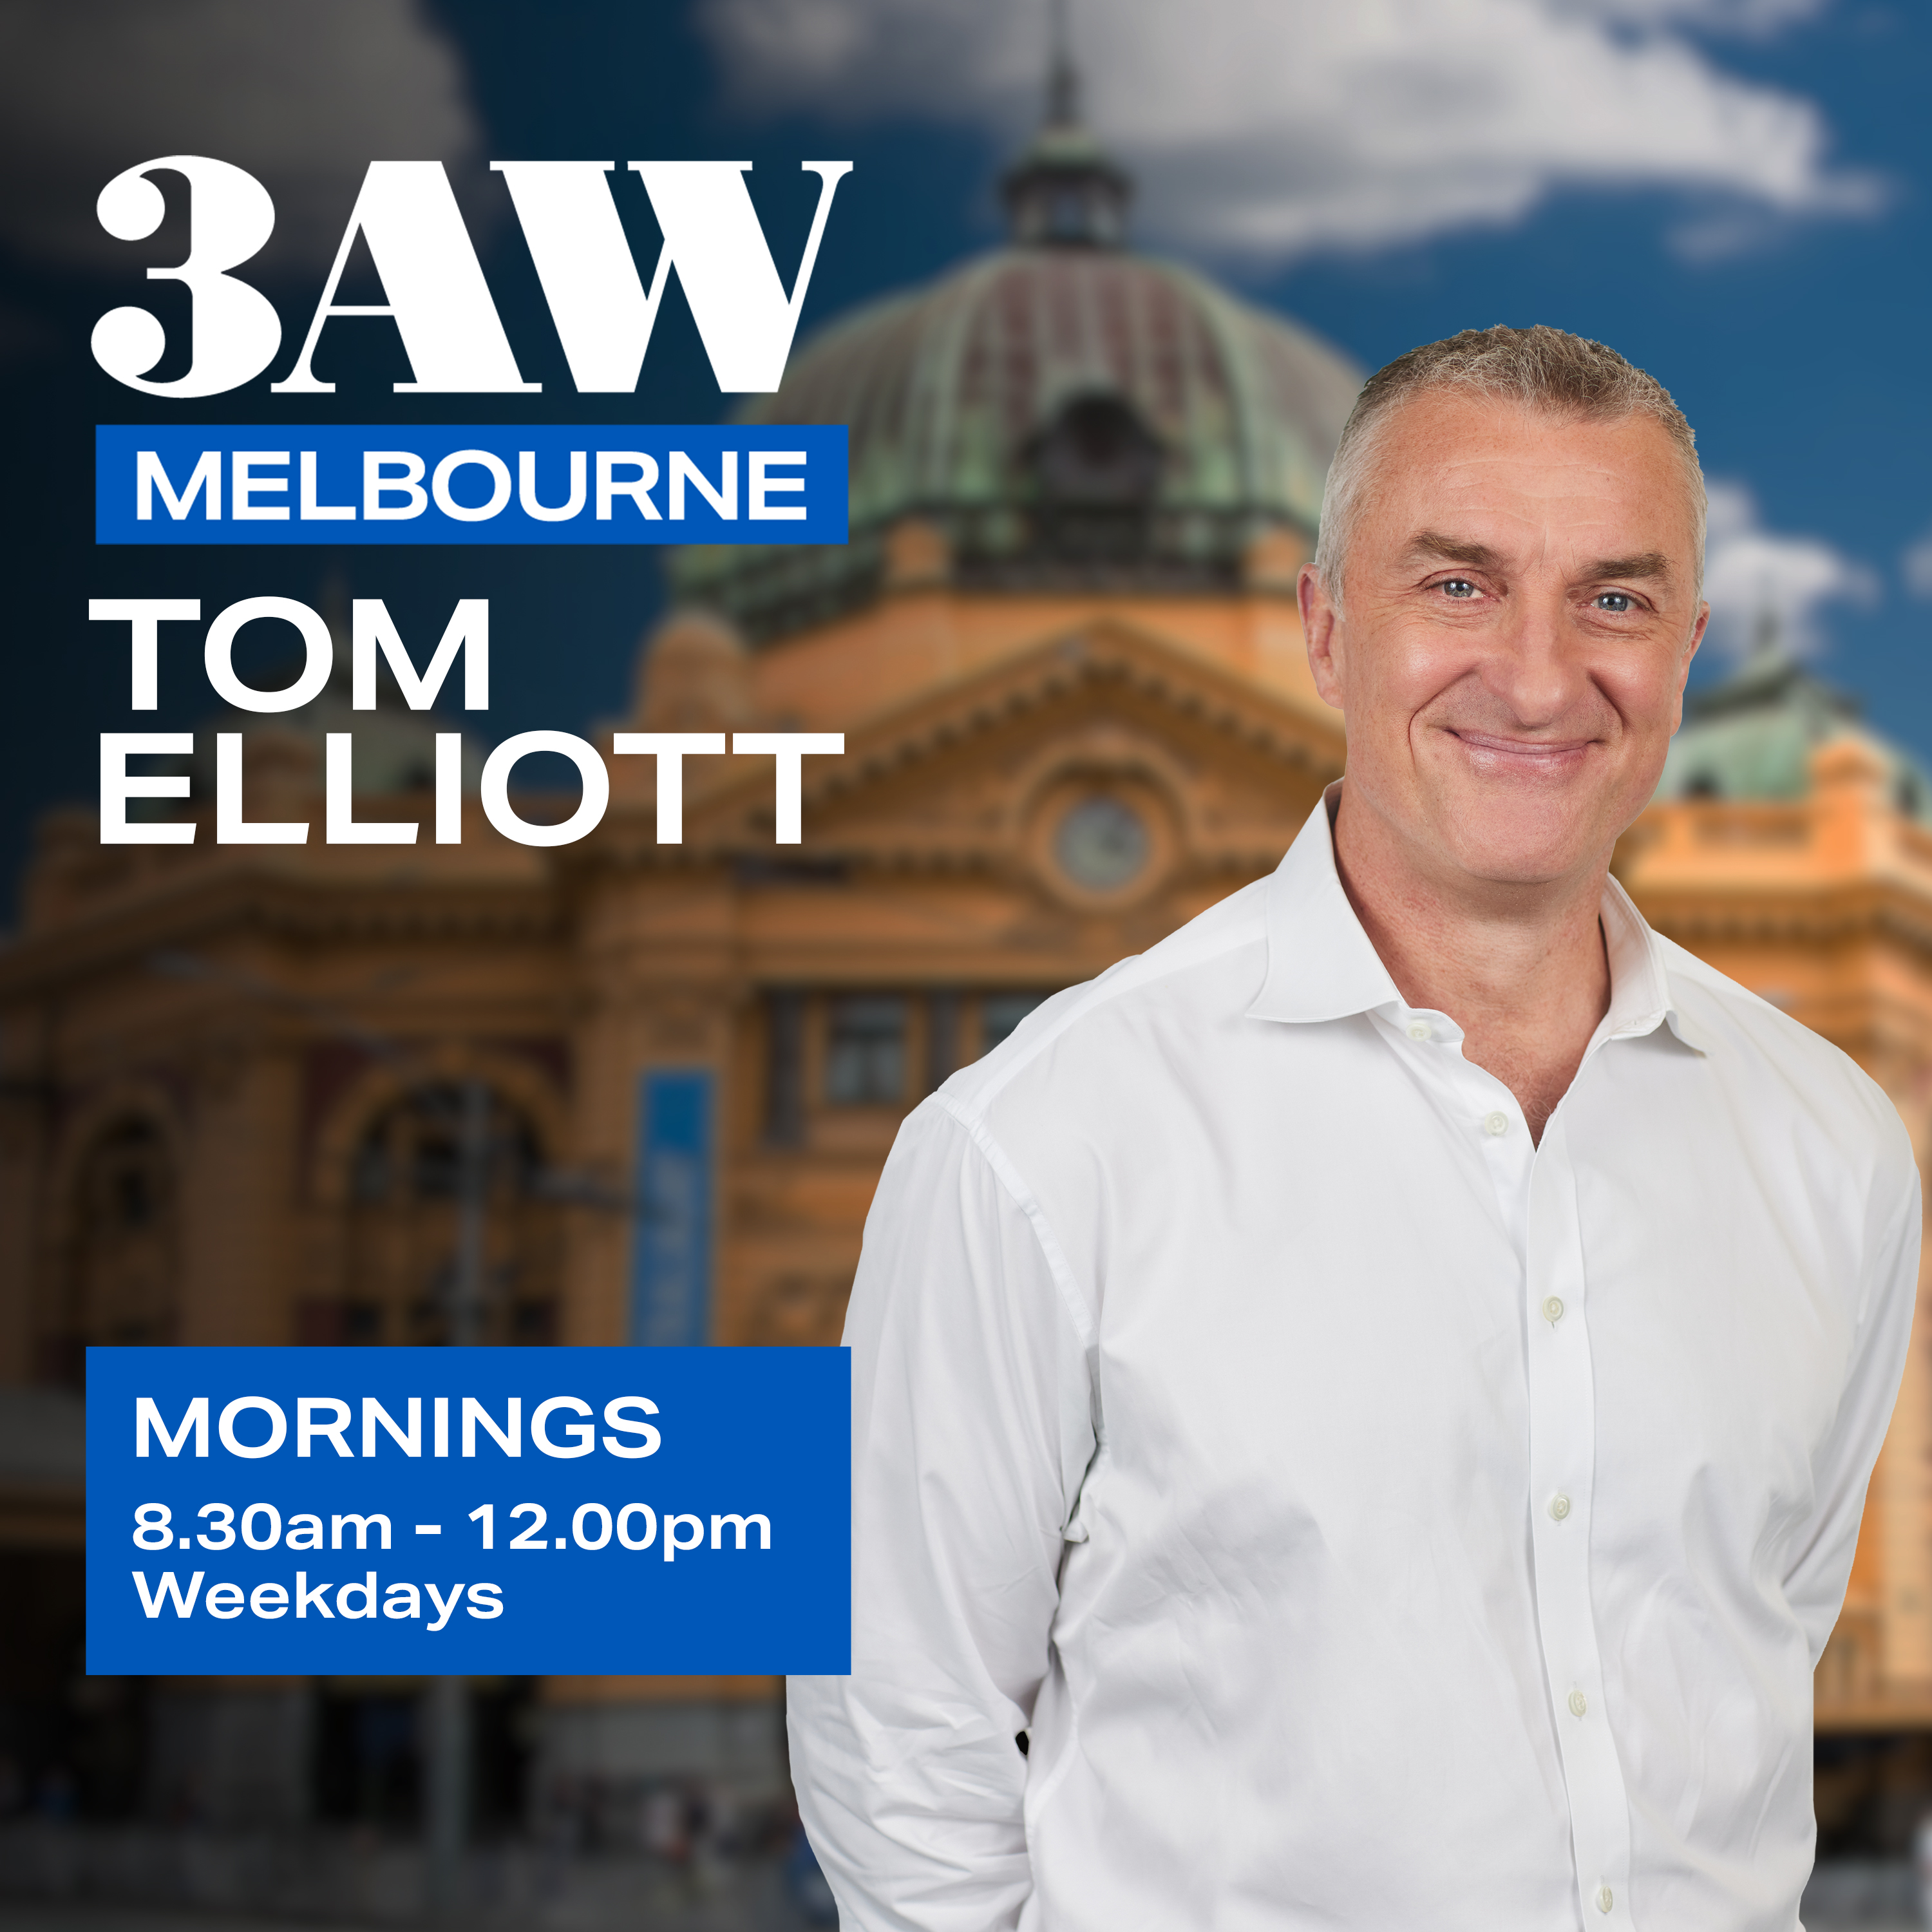 What led Tom Elliott to accuse most public servants of being 'lazy as all hell'